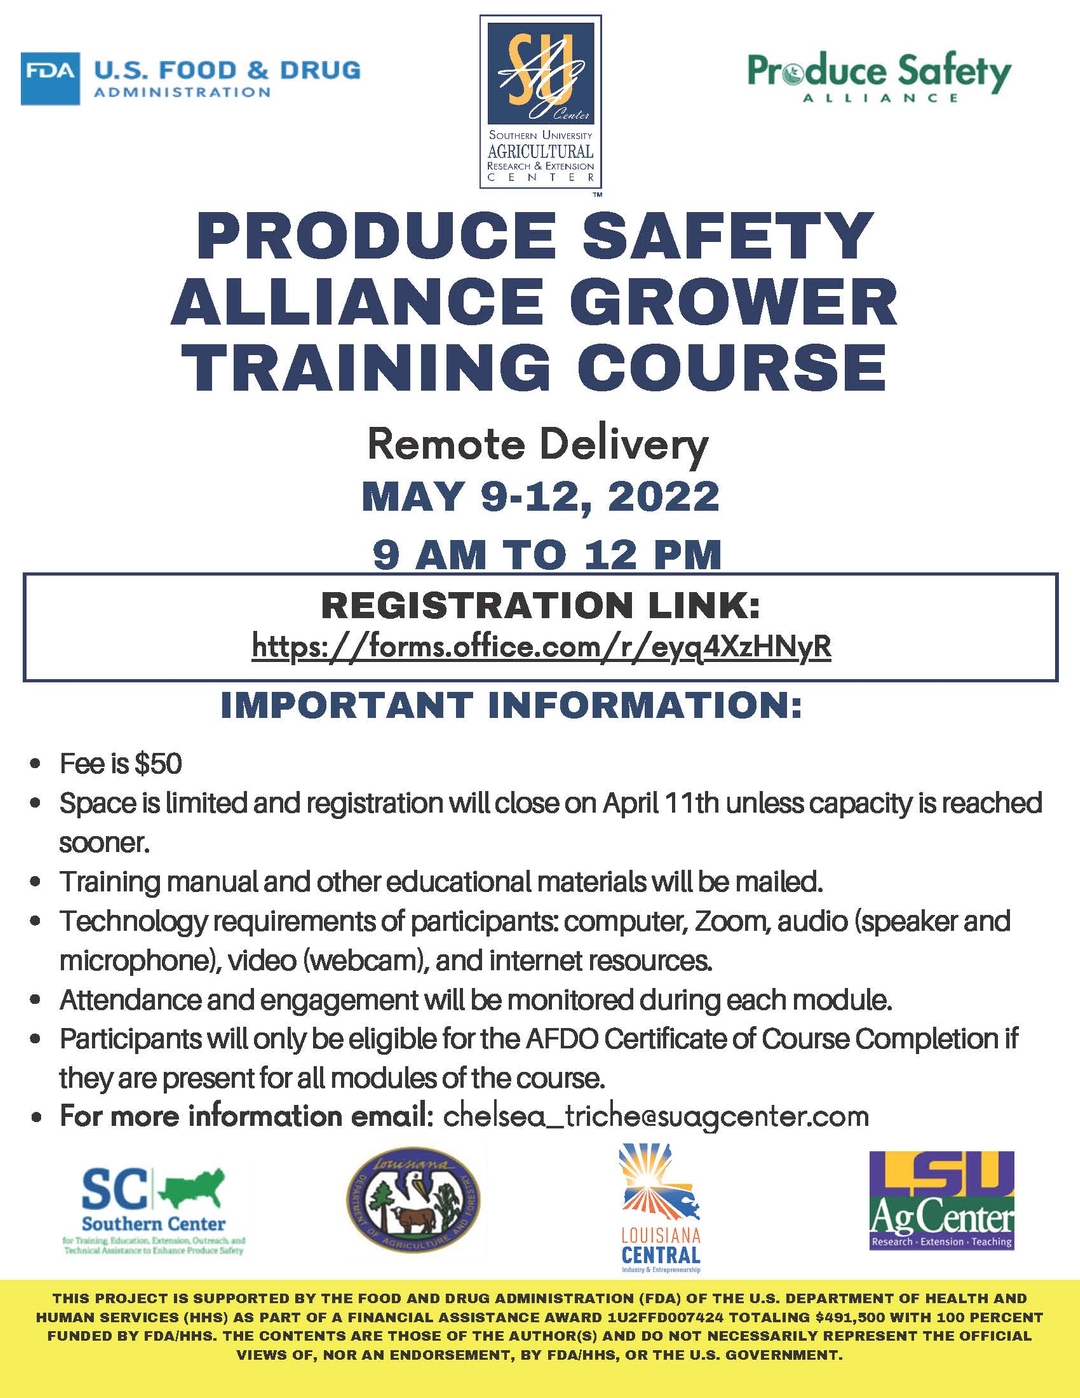 The SU Ag Center will held a Remote Produce Safety Alliance  Grower Training Course May 9-12, 2022.